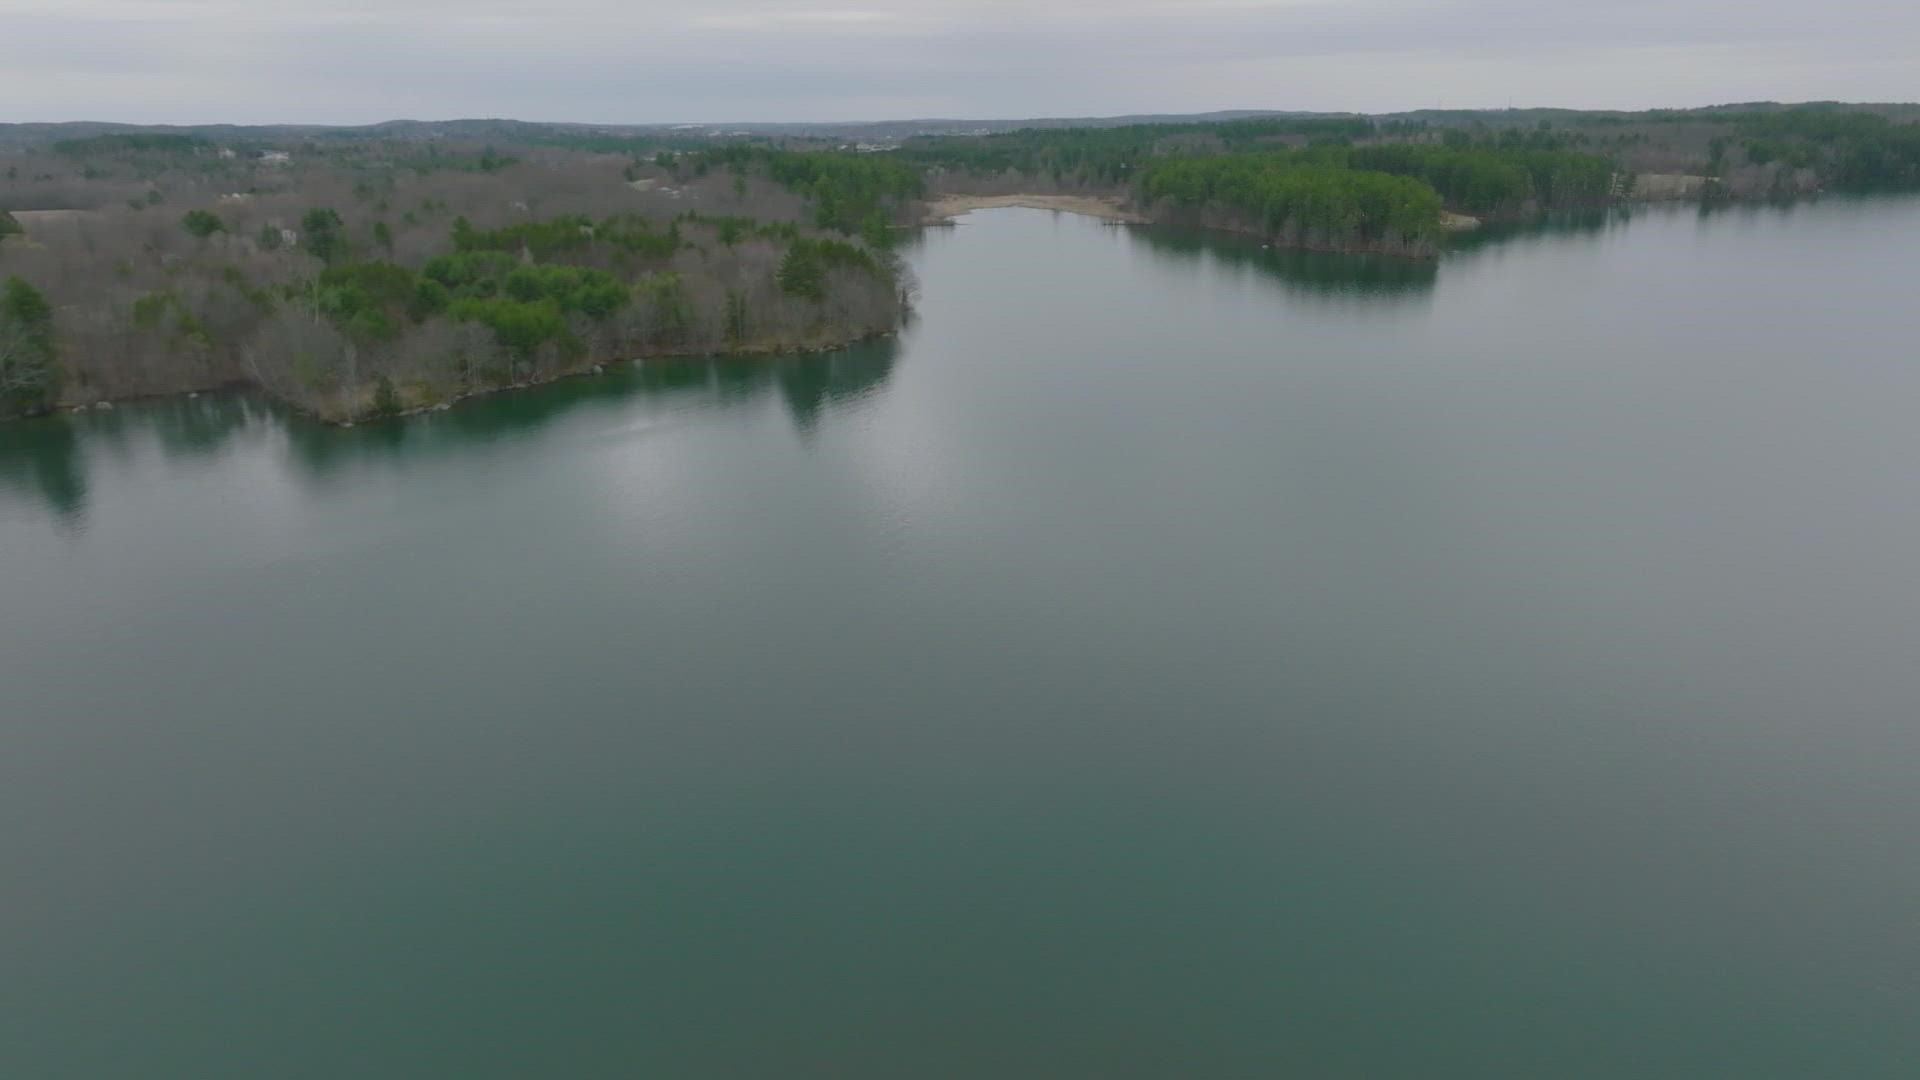 The ordinances advanced by Auburn City Council would prohibit future homes and animal farms within a portion of Lake Auburn.